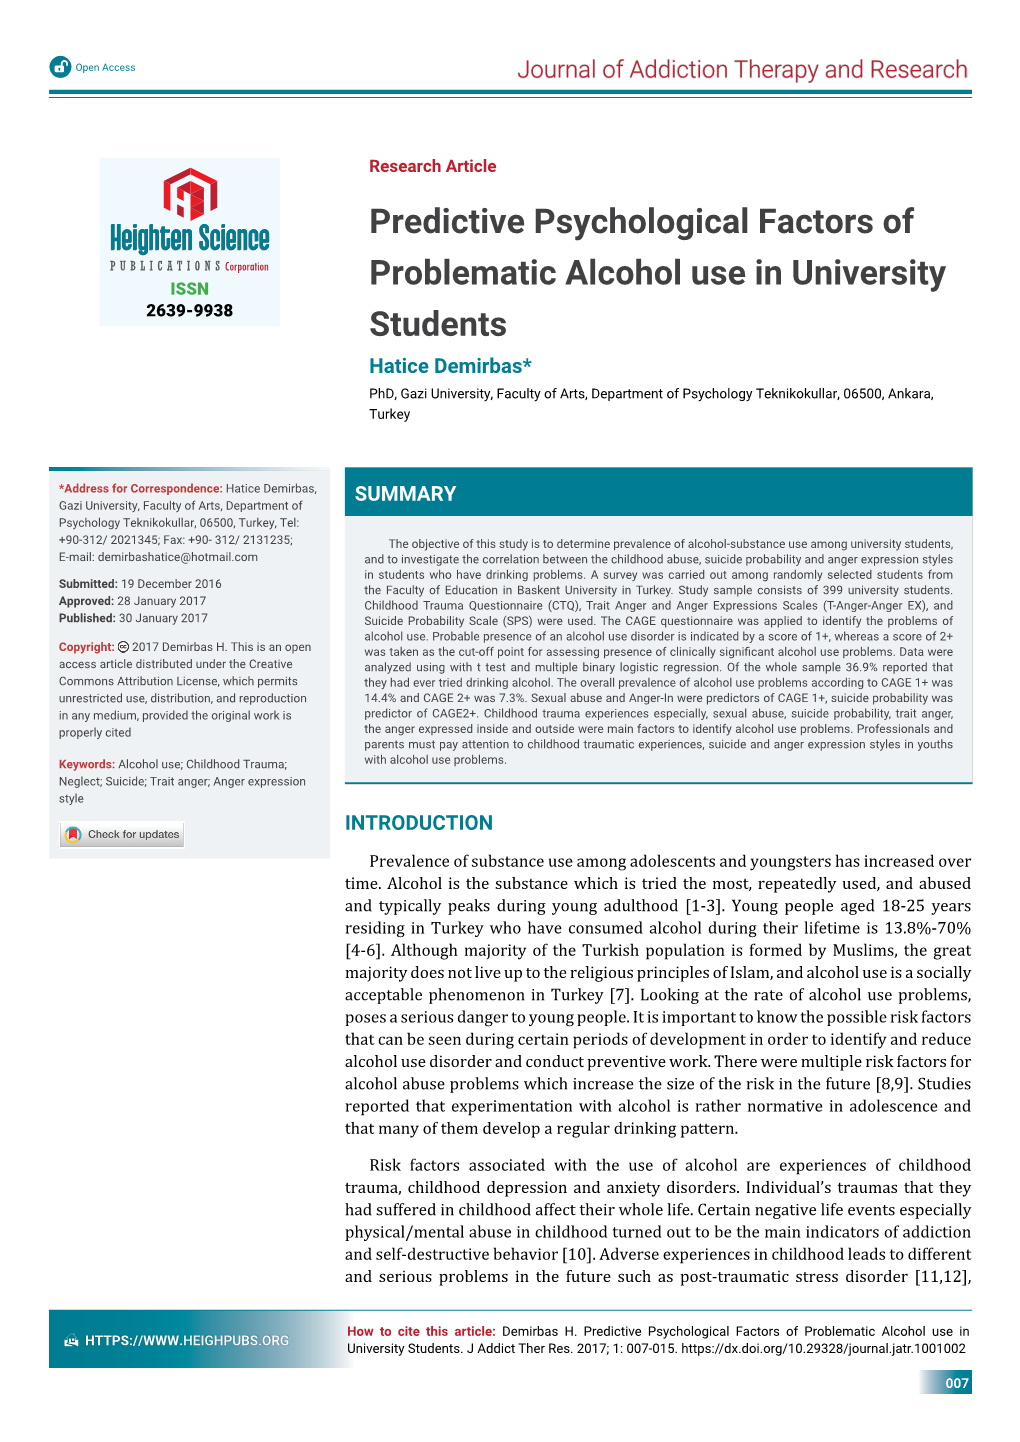 Predictive Psychological Factors of Problematic Alcohol Use in University Students